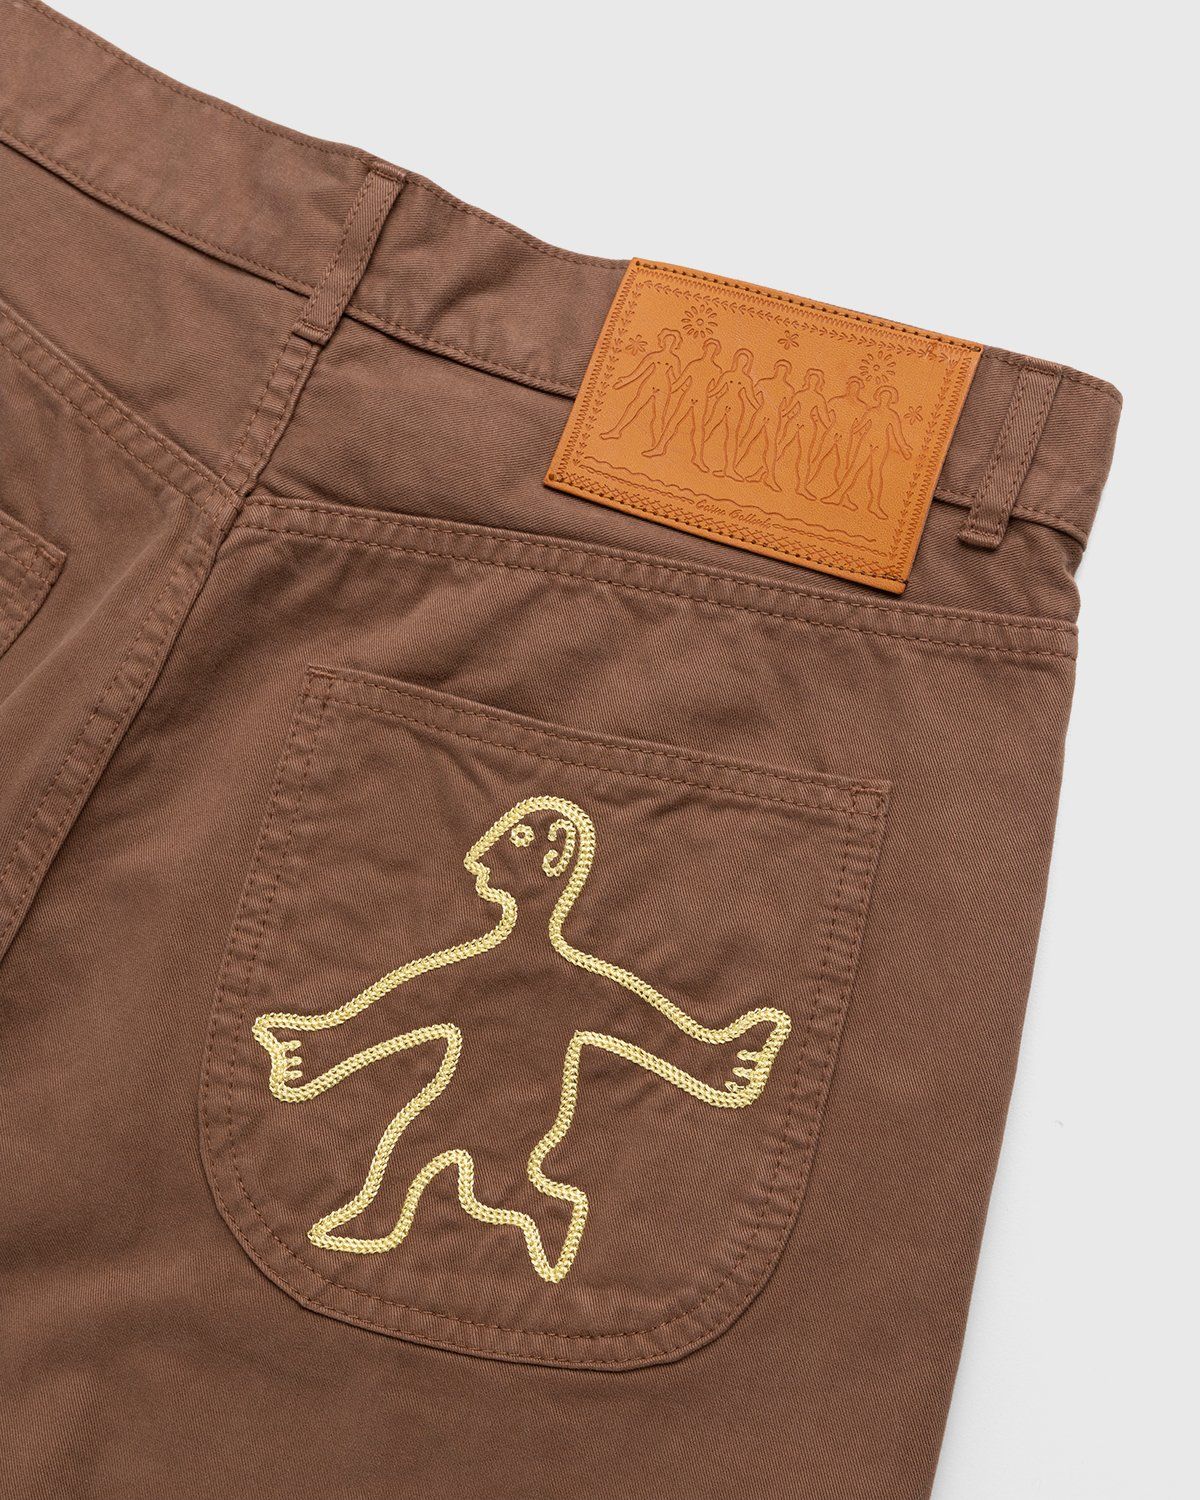 Carne Bollente – The Back Bump Trouser Brown - Image 5